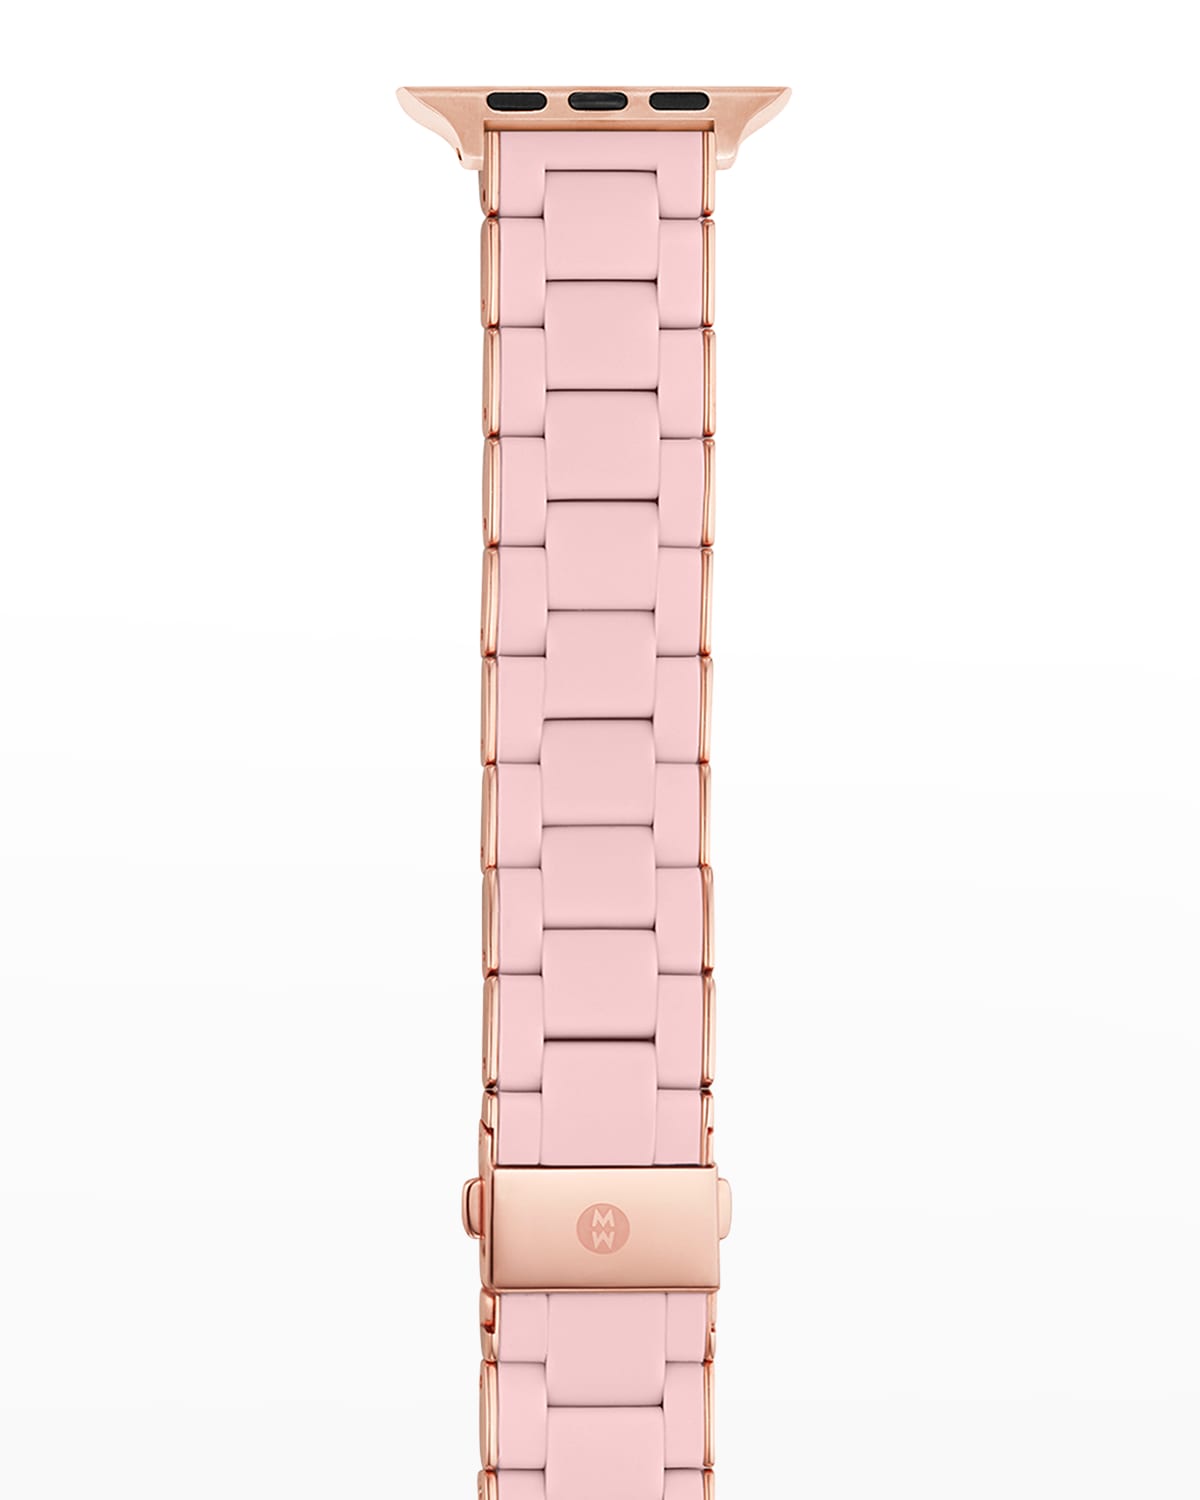 Silicone 3-Link Pink Gold Interchangeable Apple Watch Bracelet Strap, Barely Pink